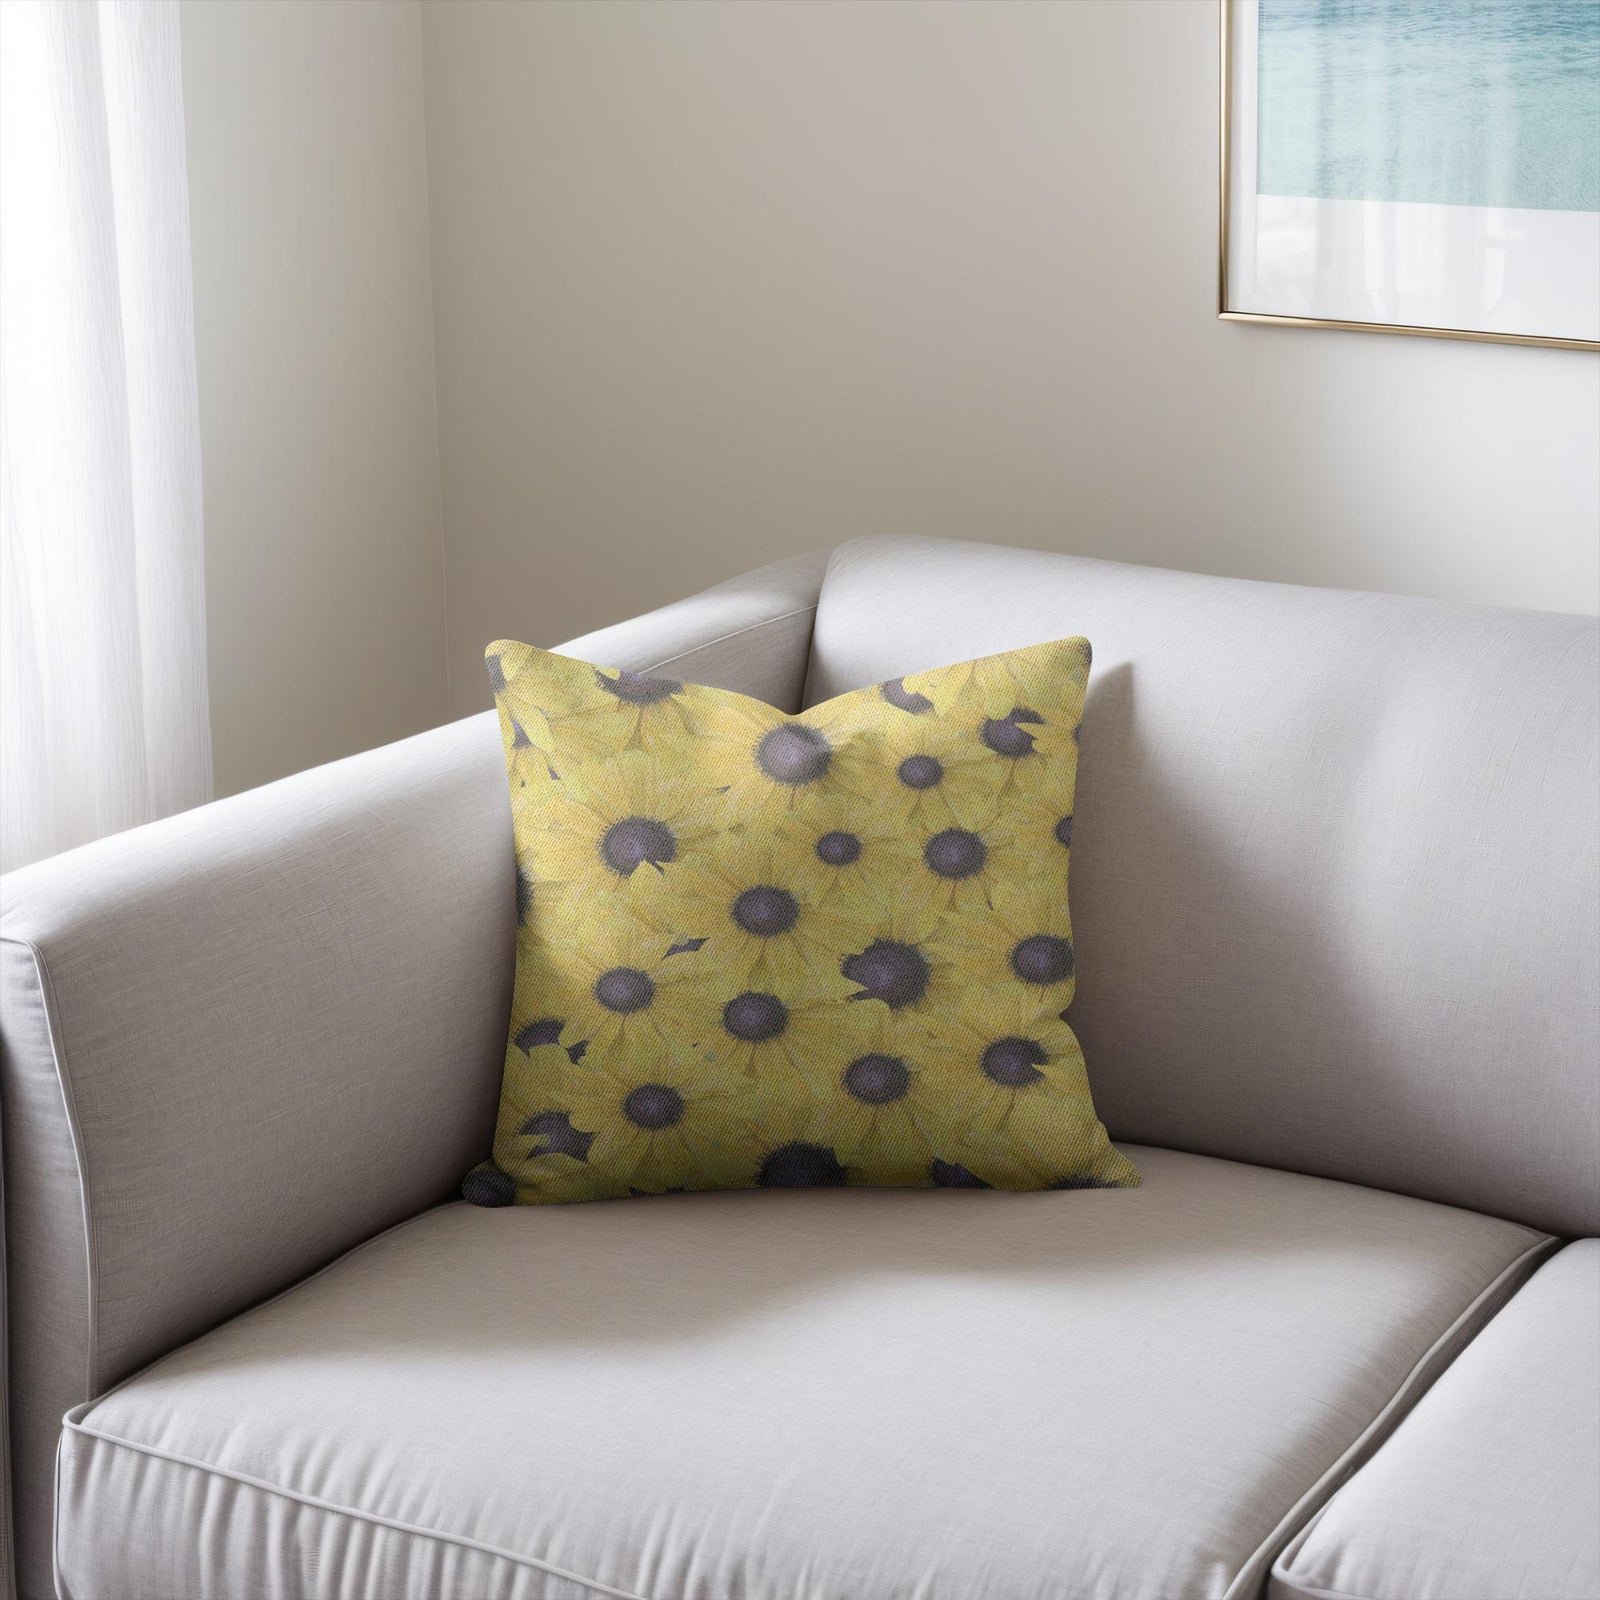 Cotton/poly blend woven pillow rudbeckia floral pattern